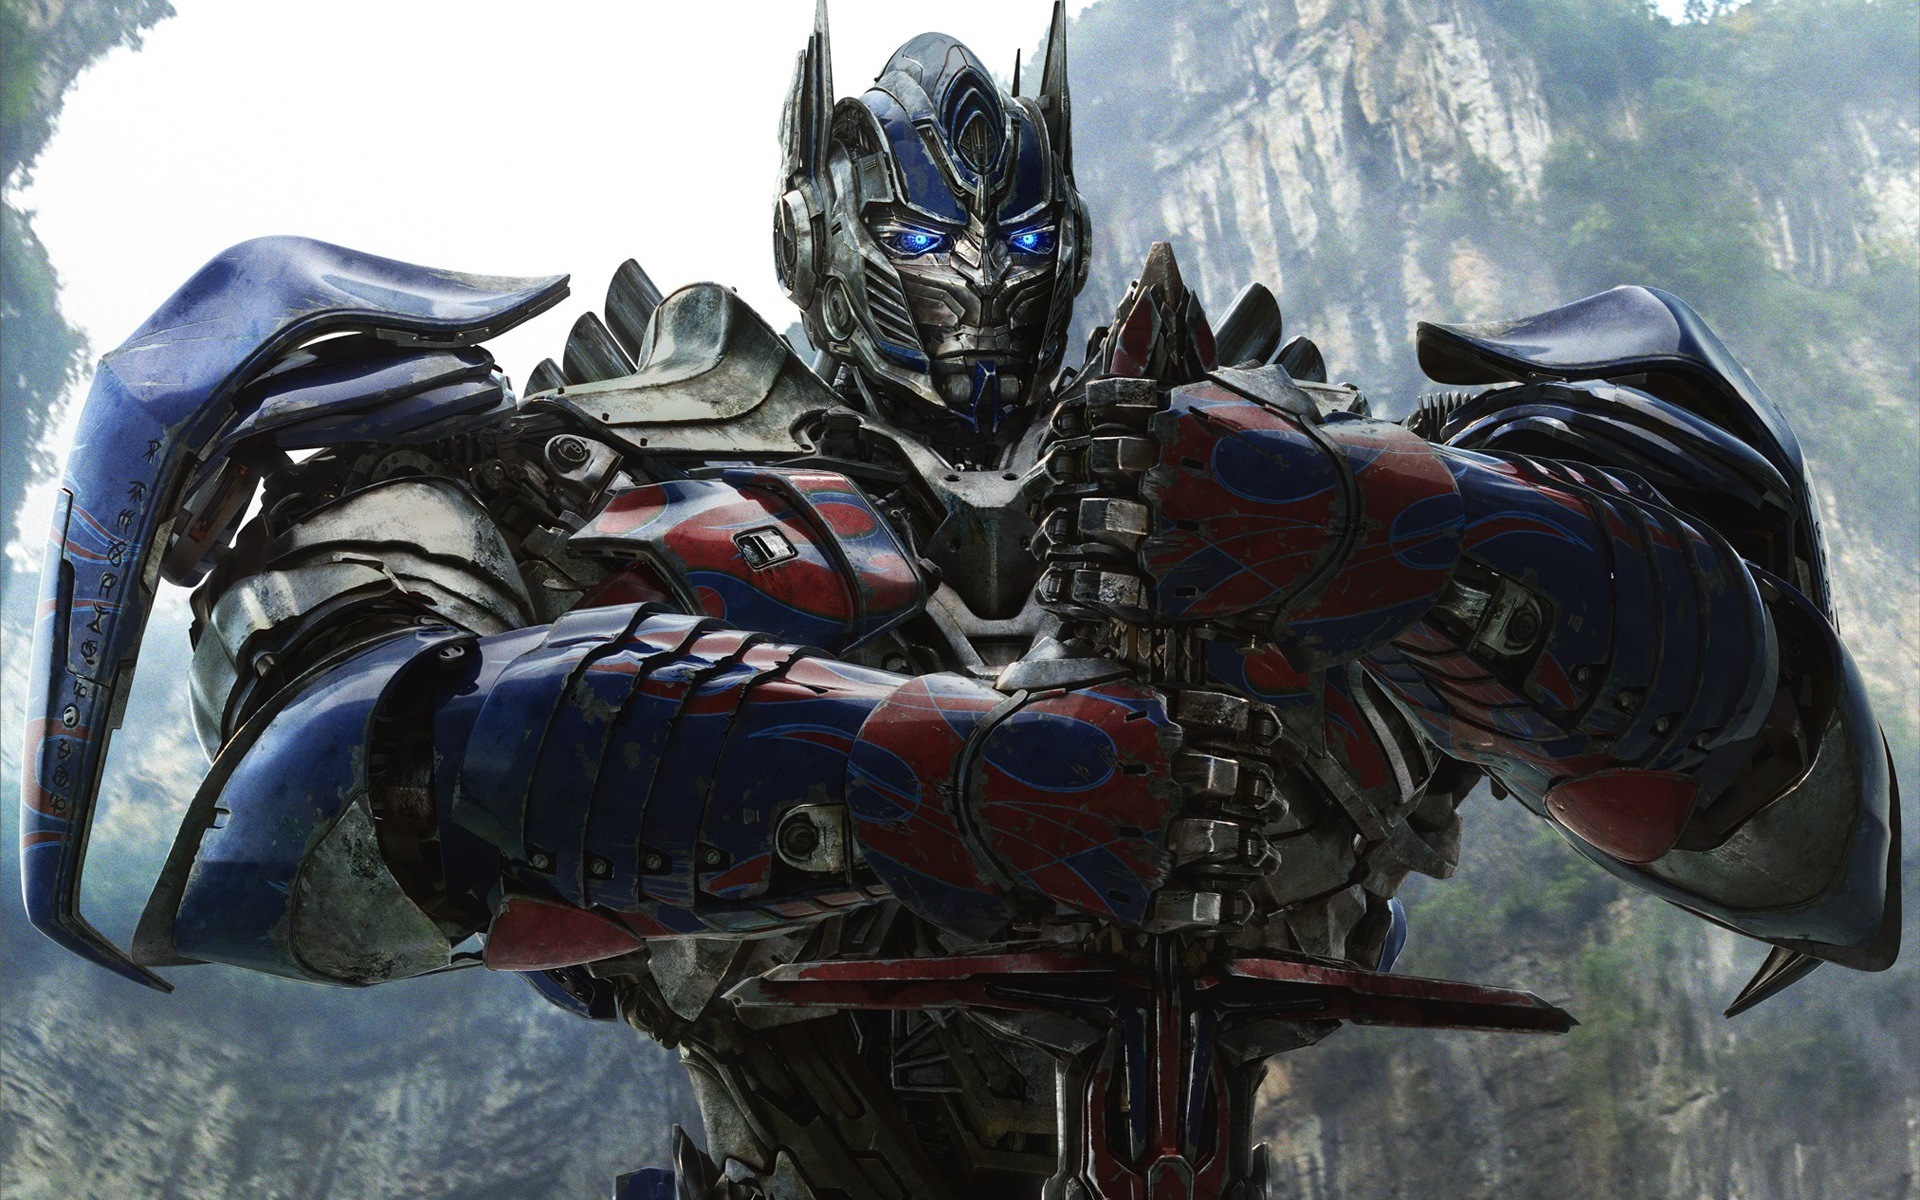 2014 Transformers: Age of Extinction HD tapety #10 - 1920x1200